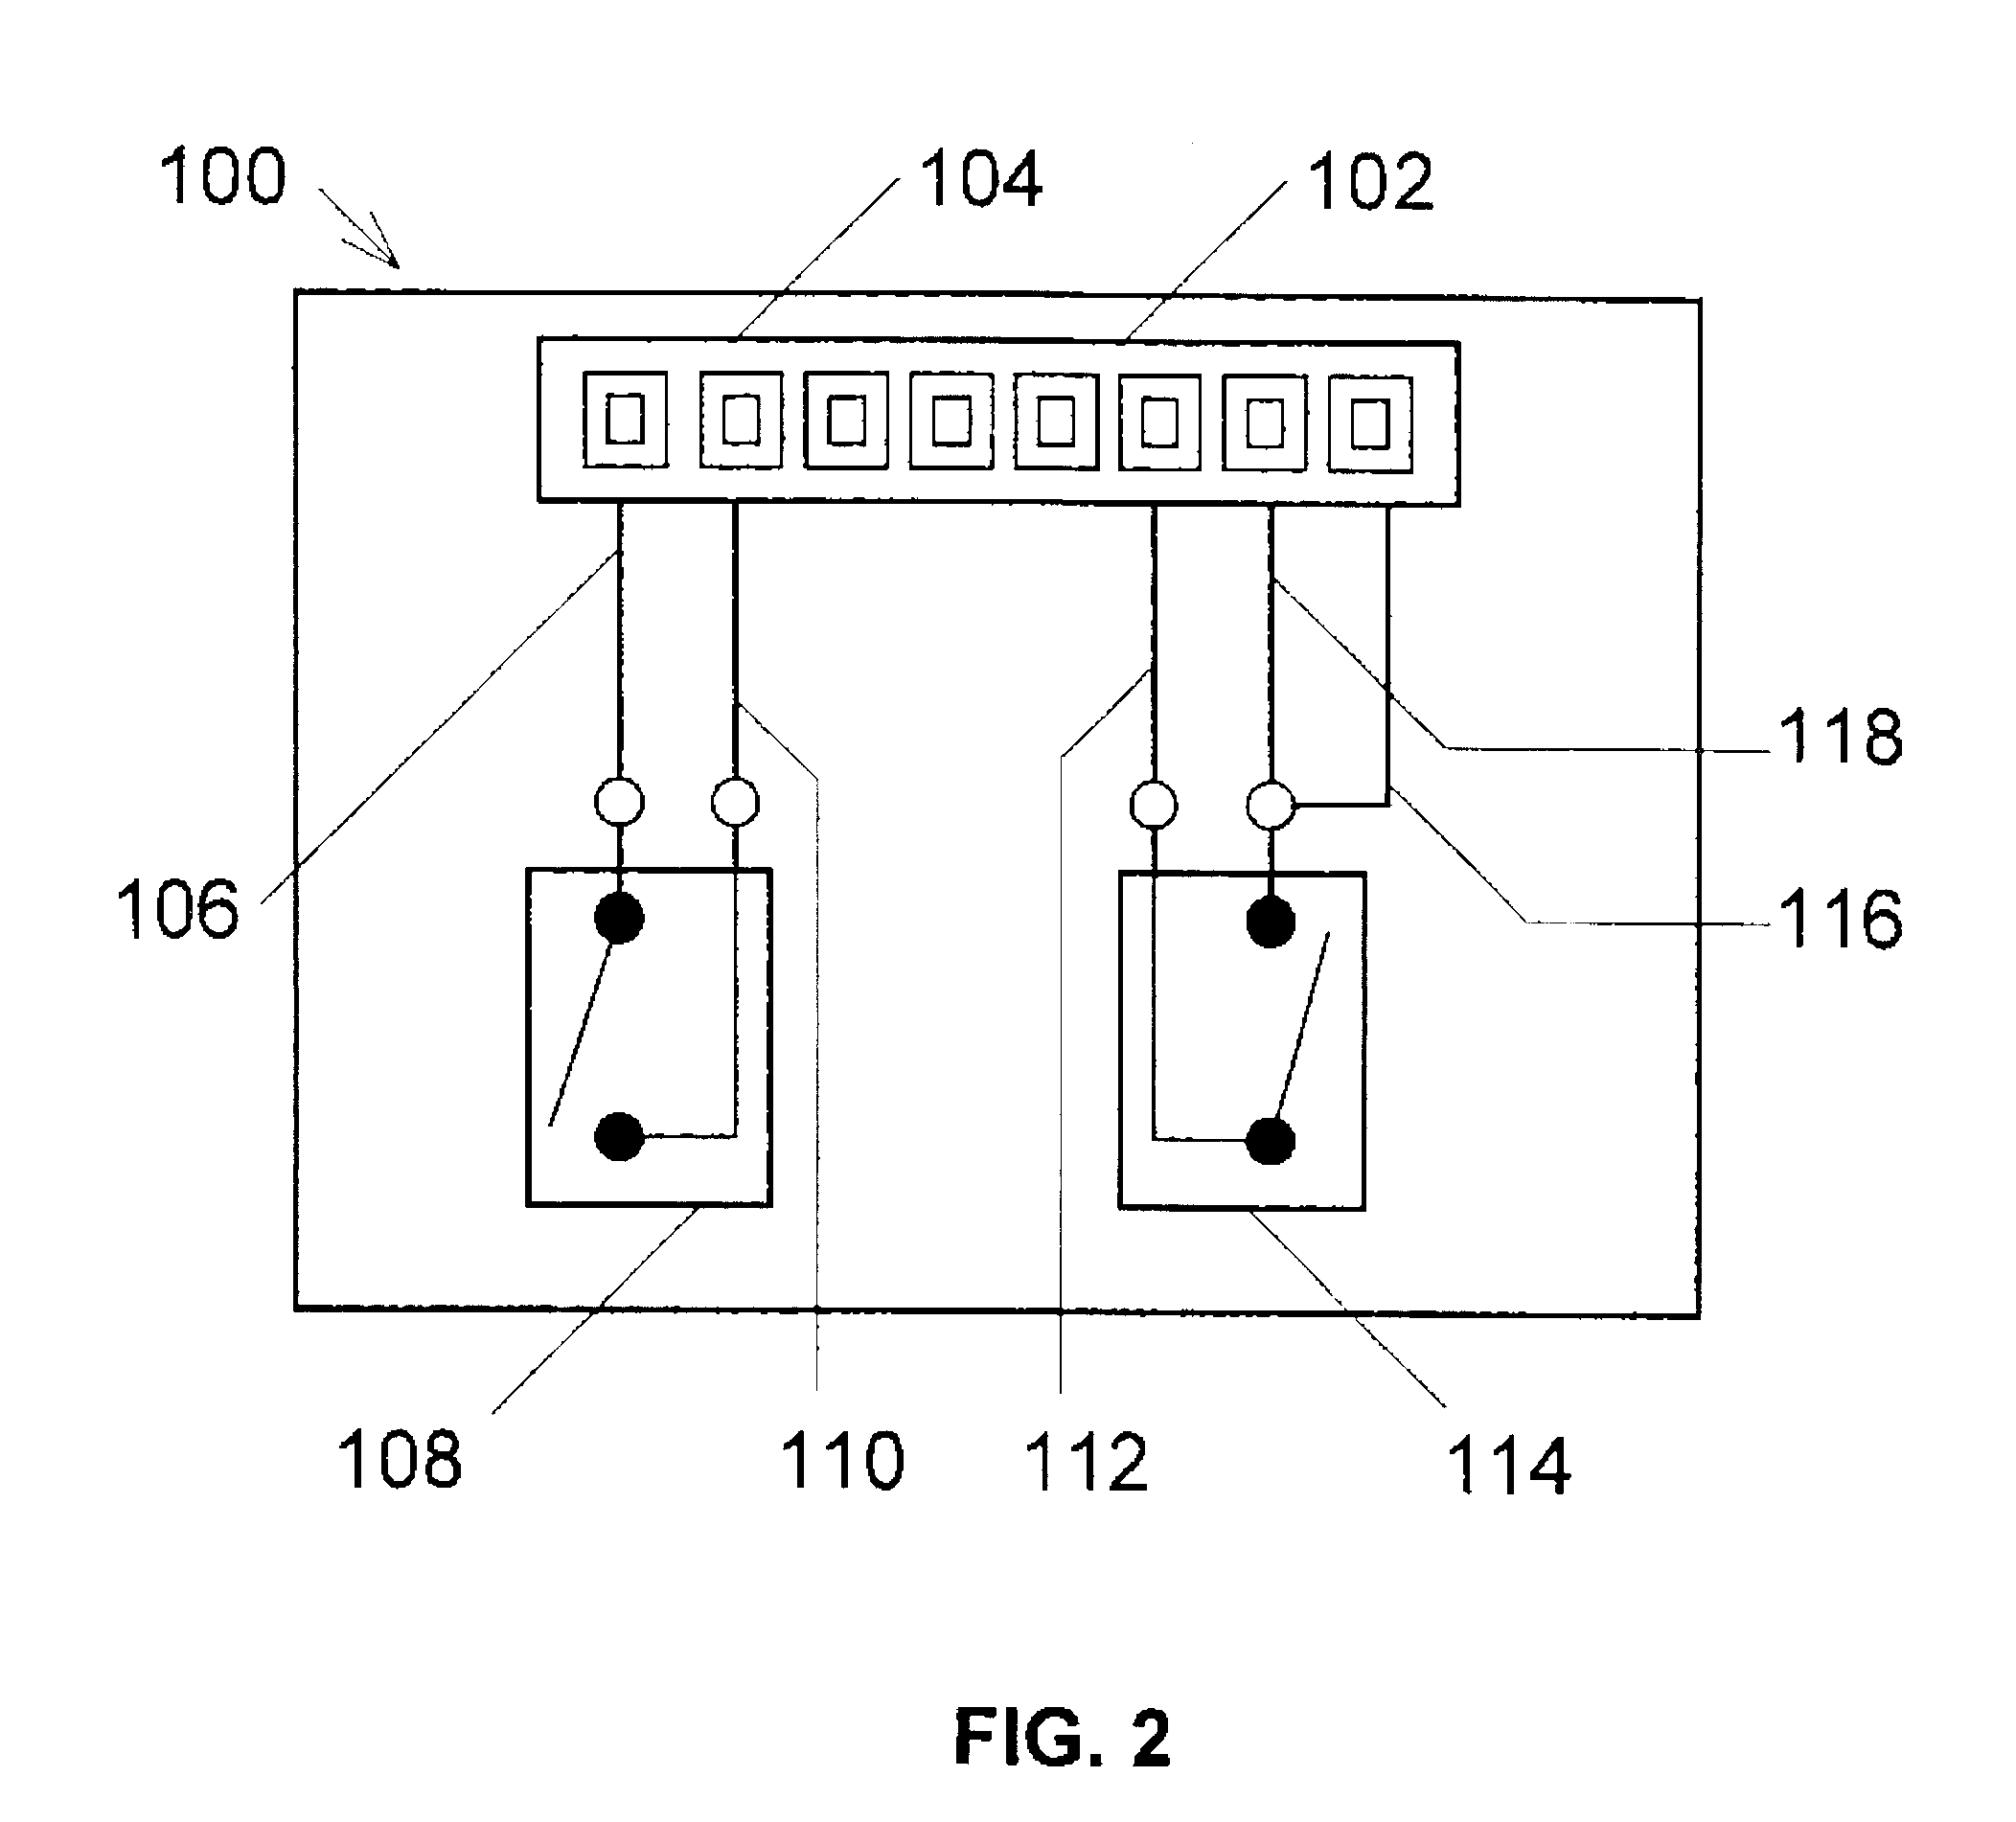 Apparatus adapted to be releasably connectable to the sub base of a thermostat